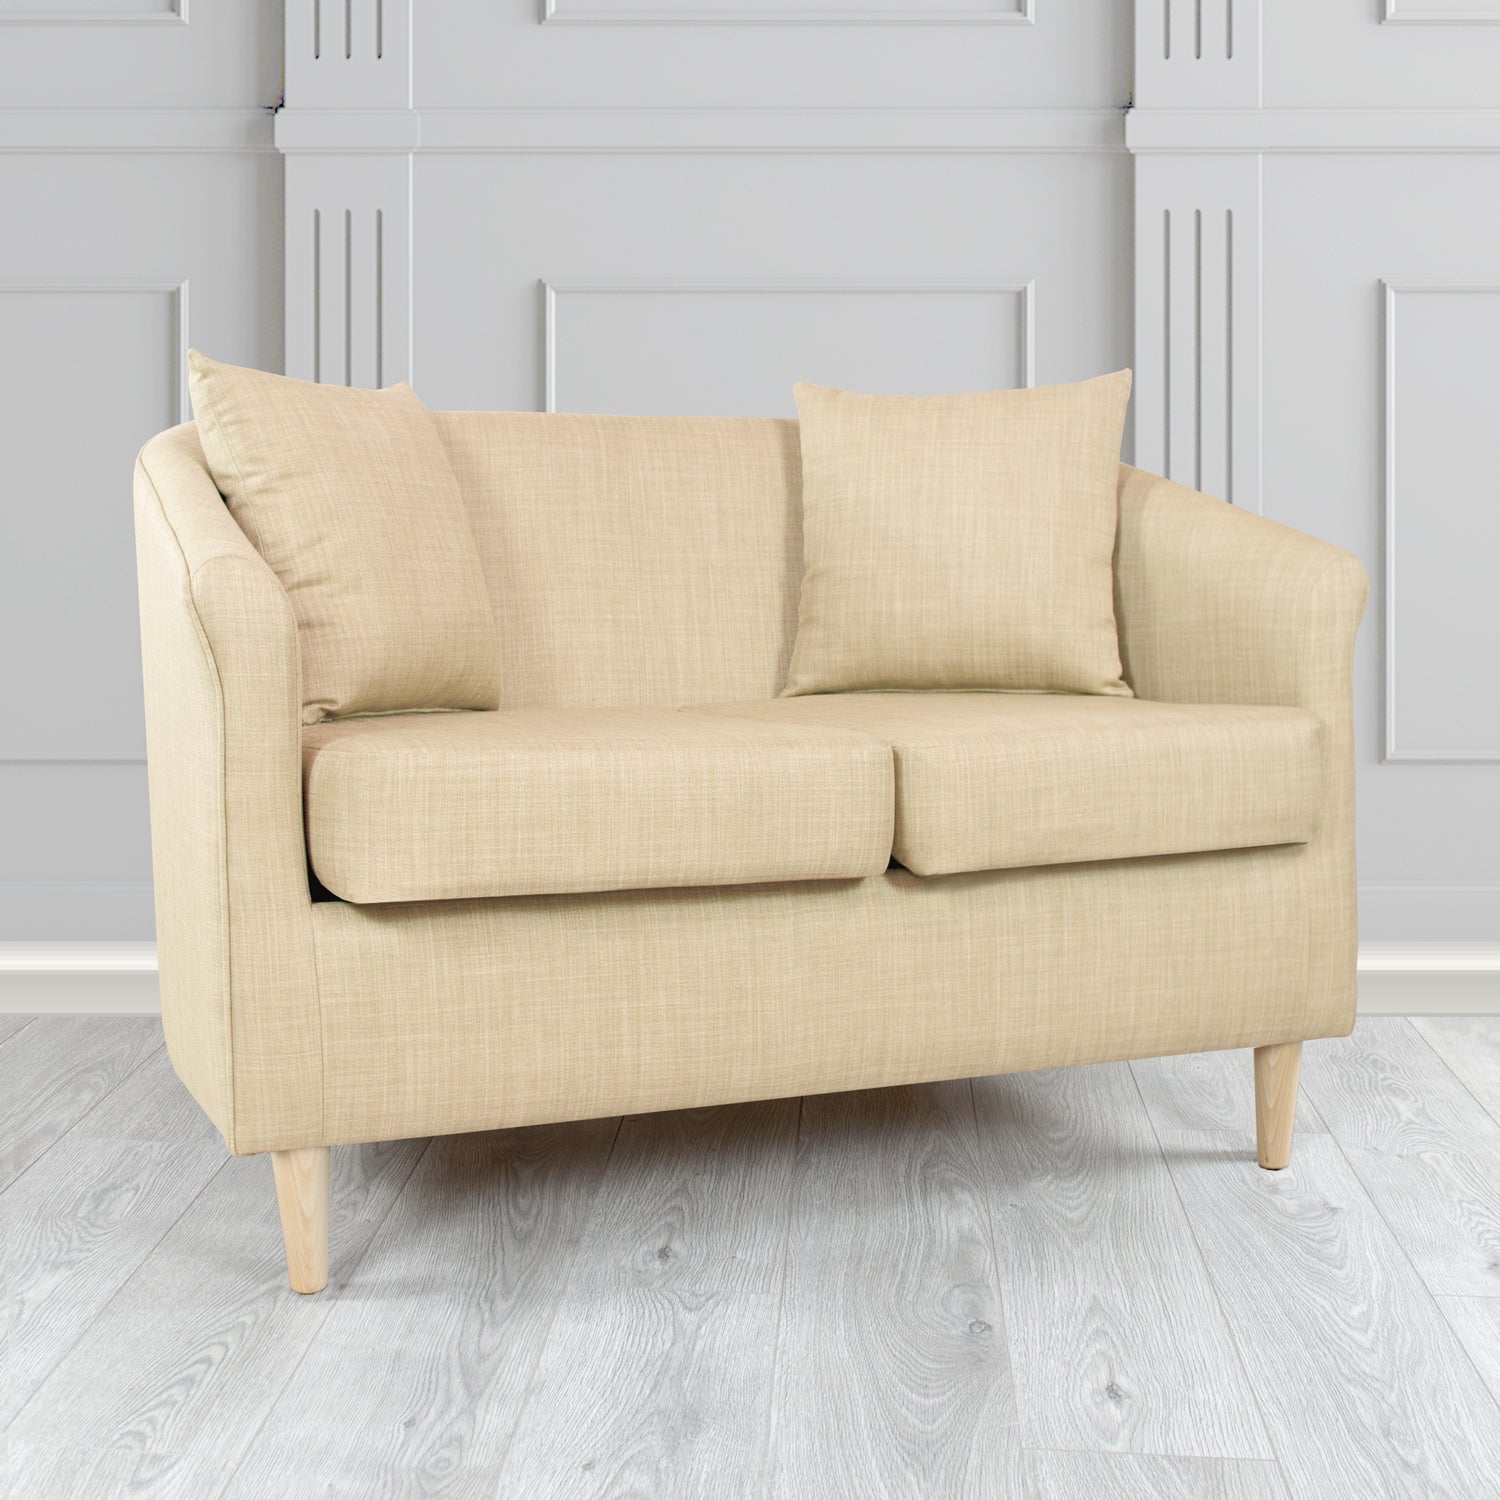 St Tropez Charles Pearl Plain Linen Fabric 2 Seater Tub Sofa with Scatter Cushions - The Tub Chair Shop